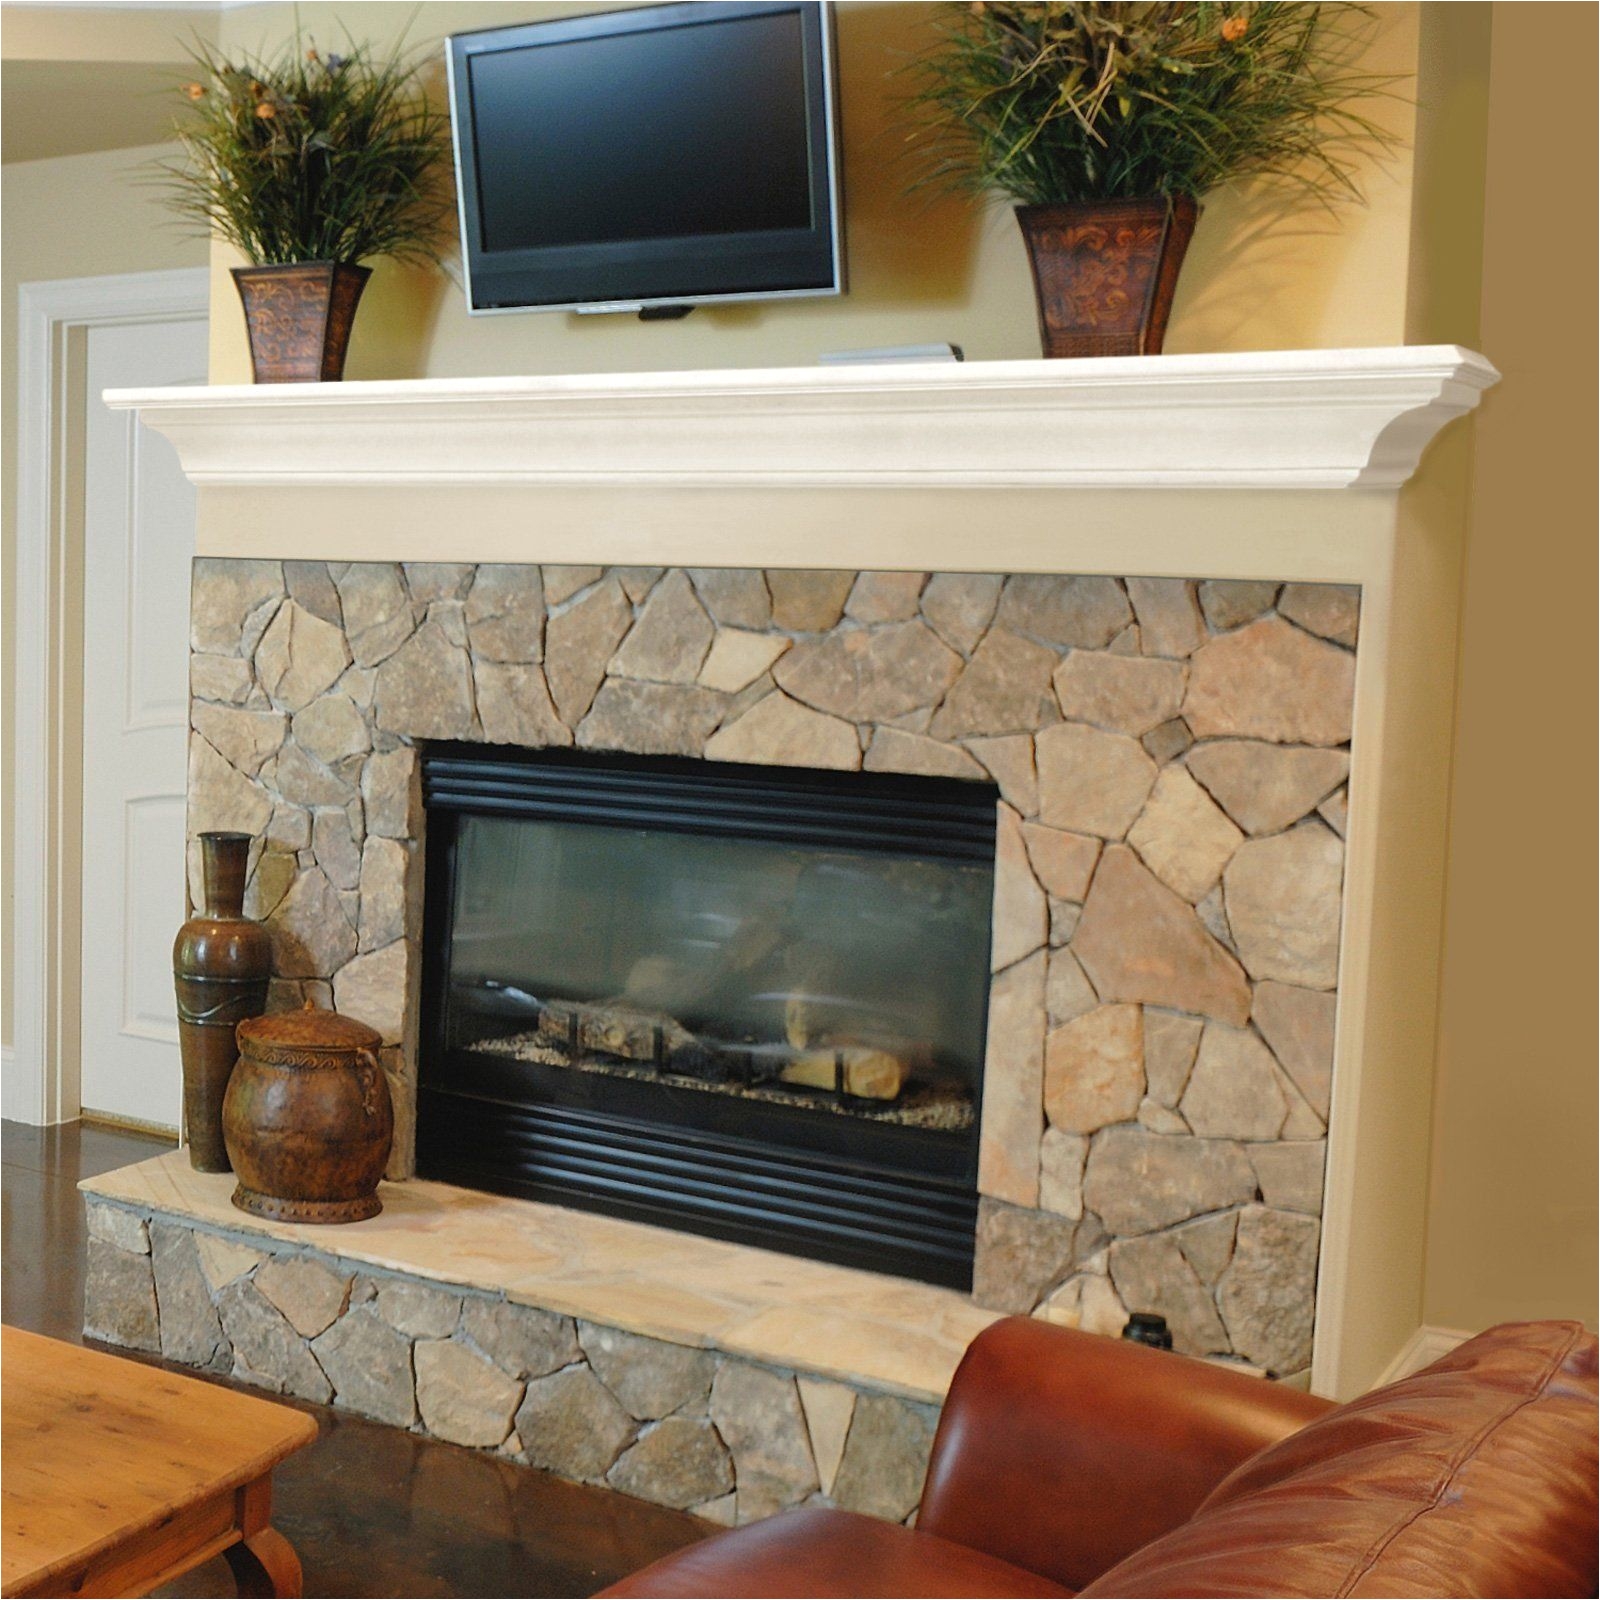 white mantel gas fireplace painted wooden white fireplace mantel shelf pinterest white of white mantel gas fireplace